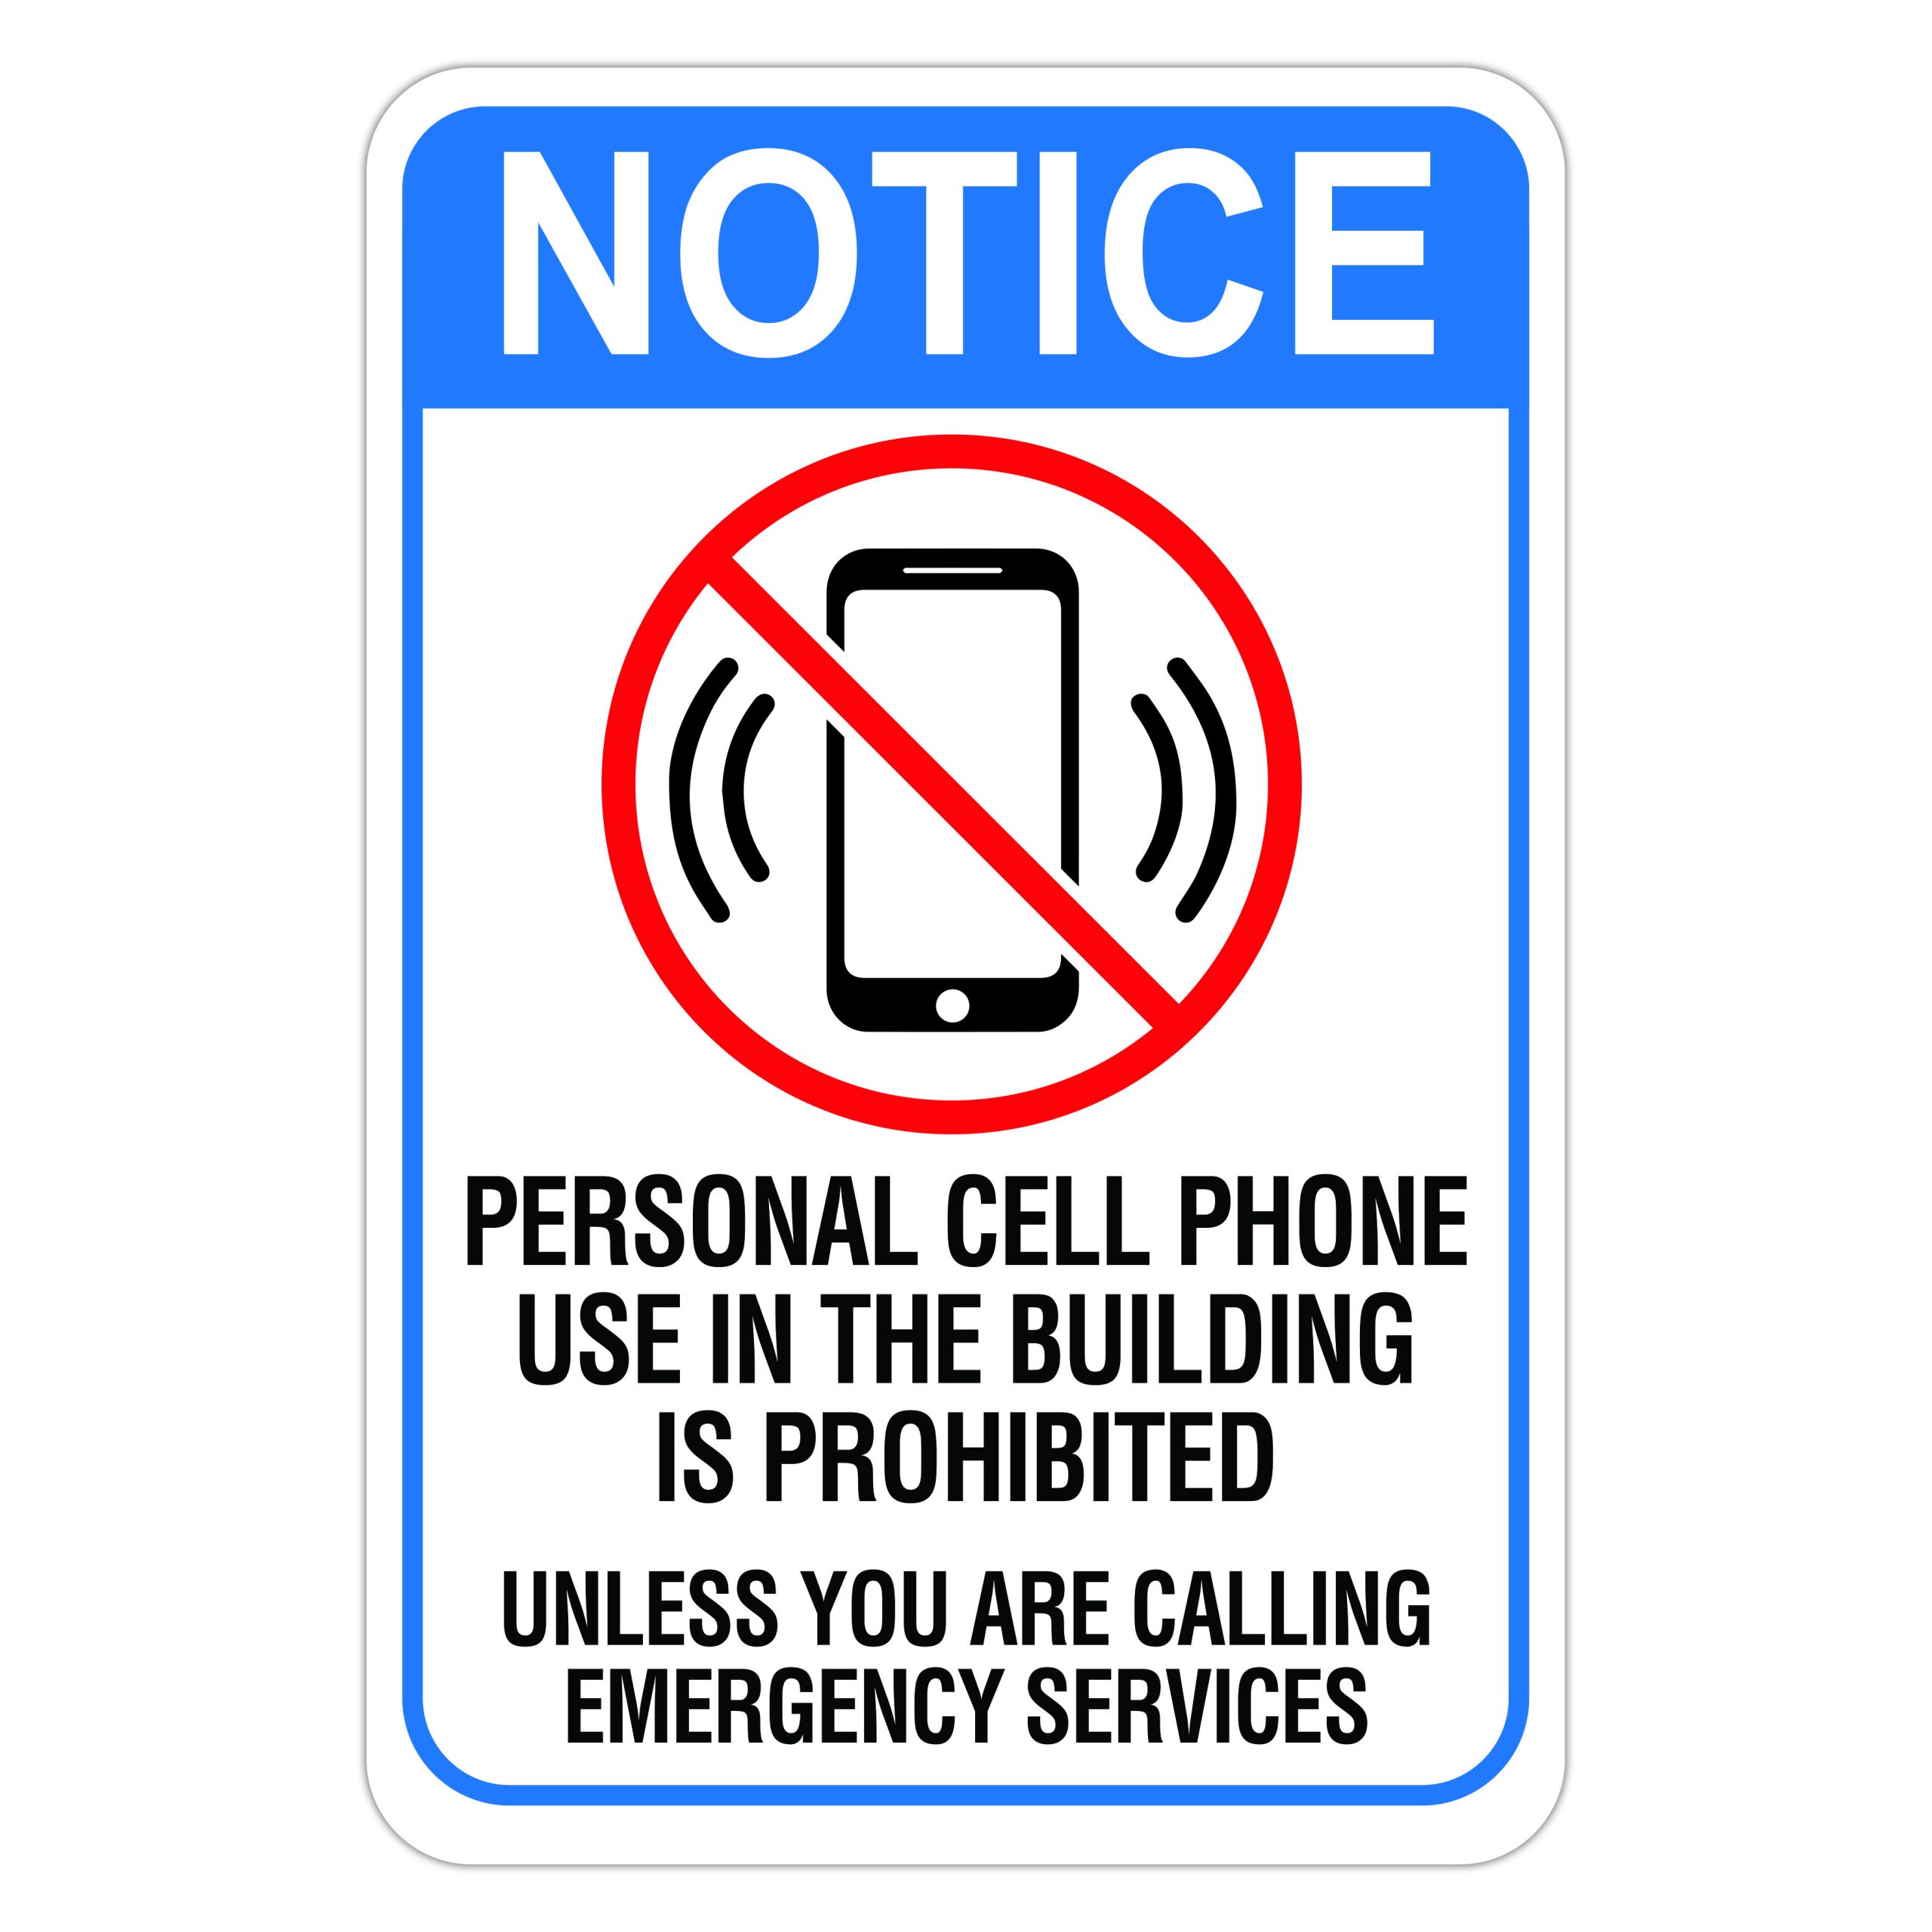 12x18 6 Pack No Cell Phones at Counter Print Large Picture Notice Business Office Employee Work Sign Aluminum Metal 